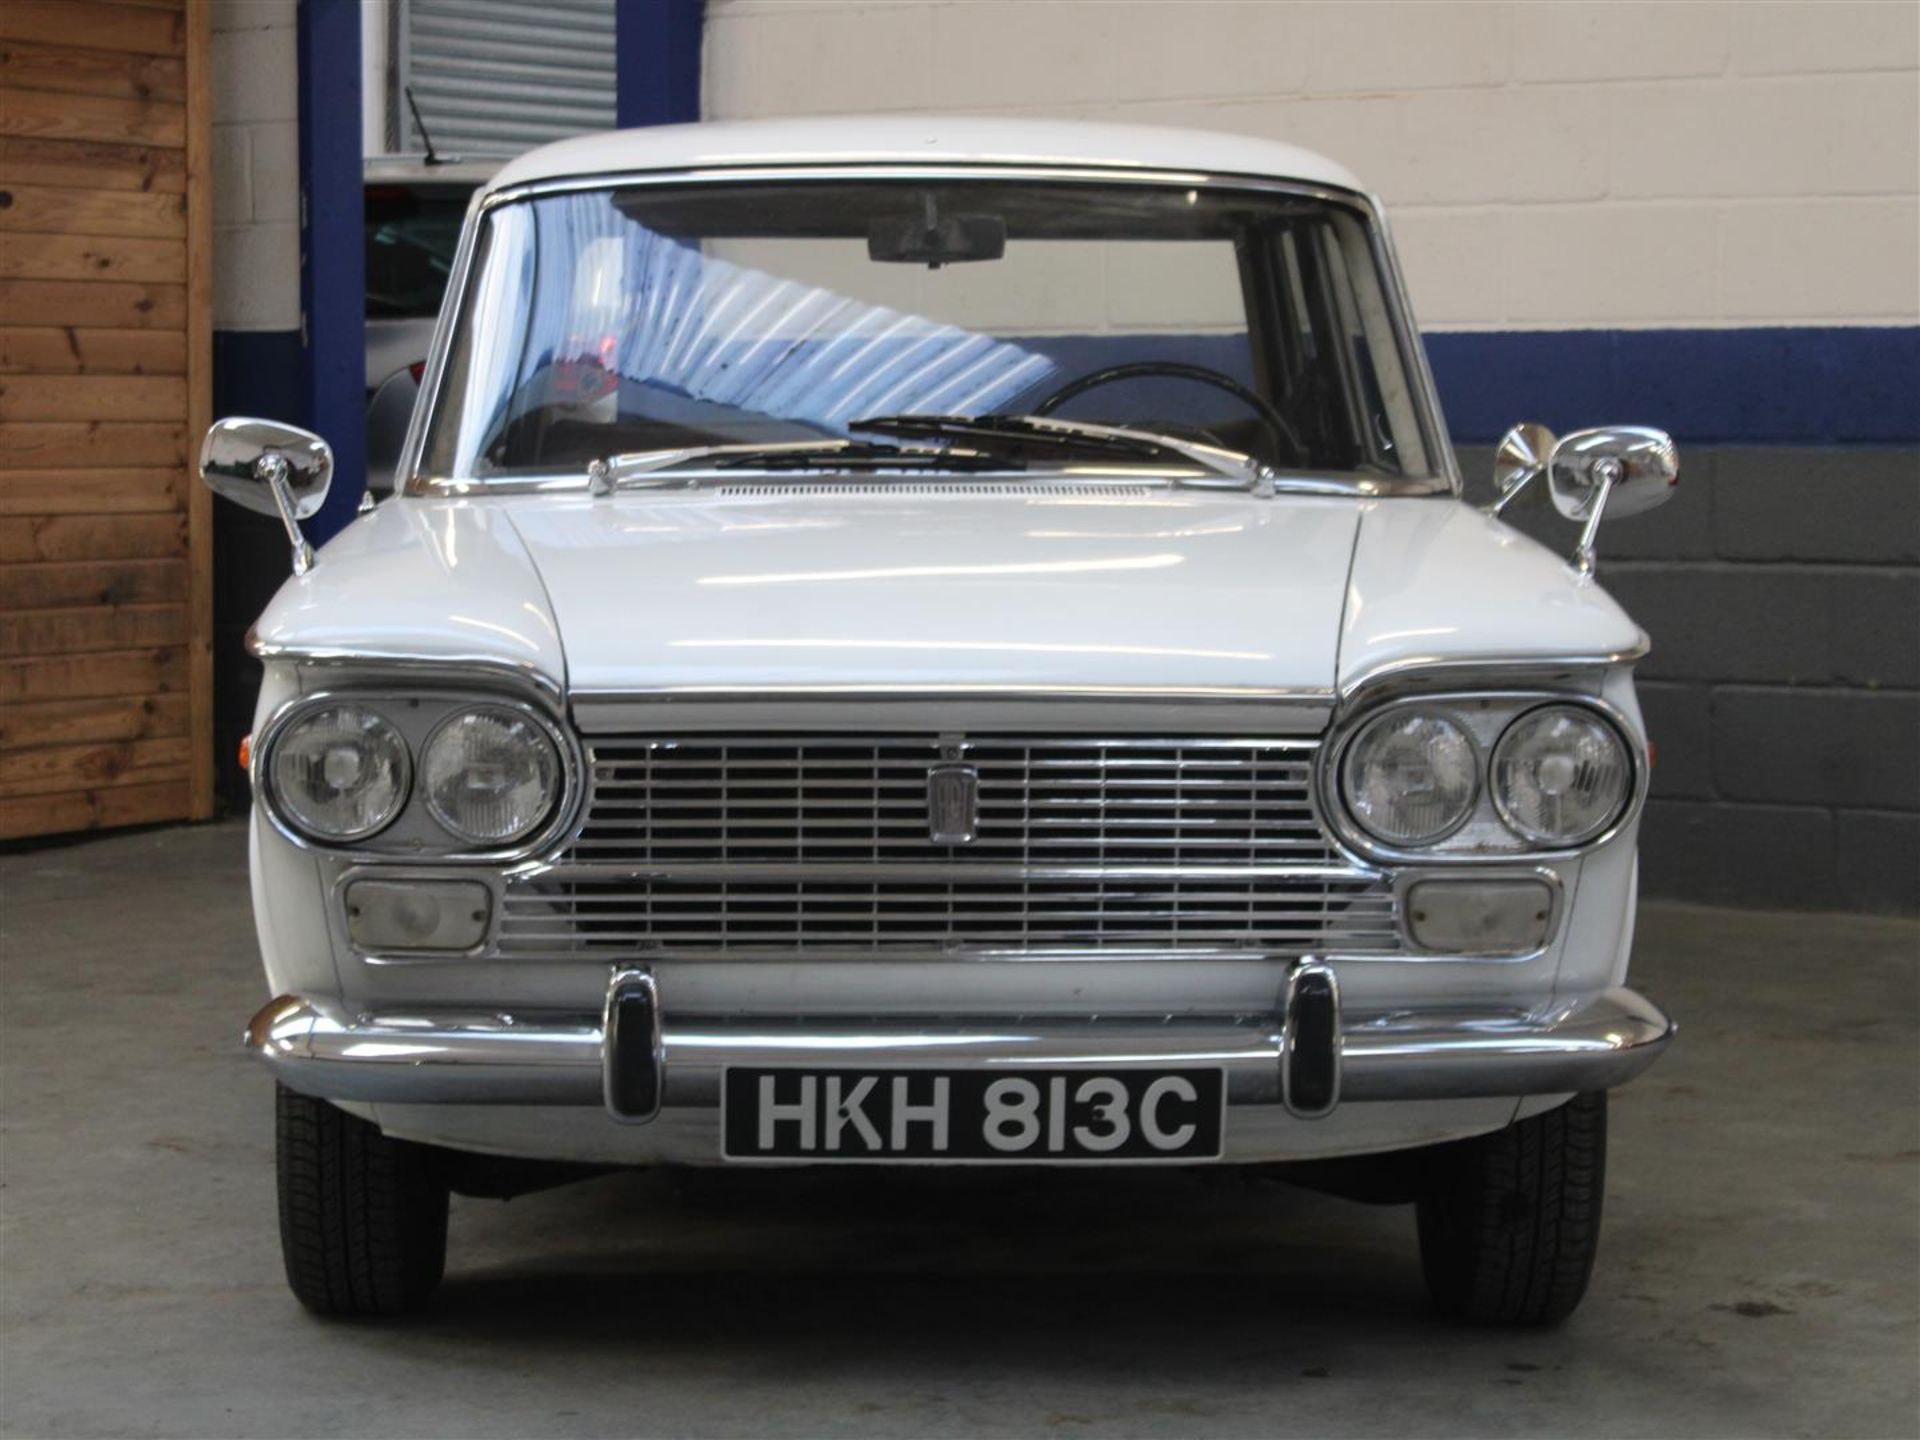 1965 Fiat 1500 C LHD - Image 2 of 22